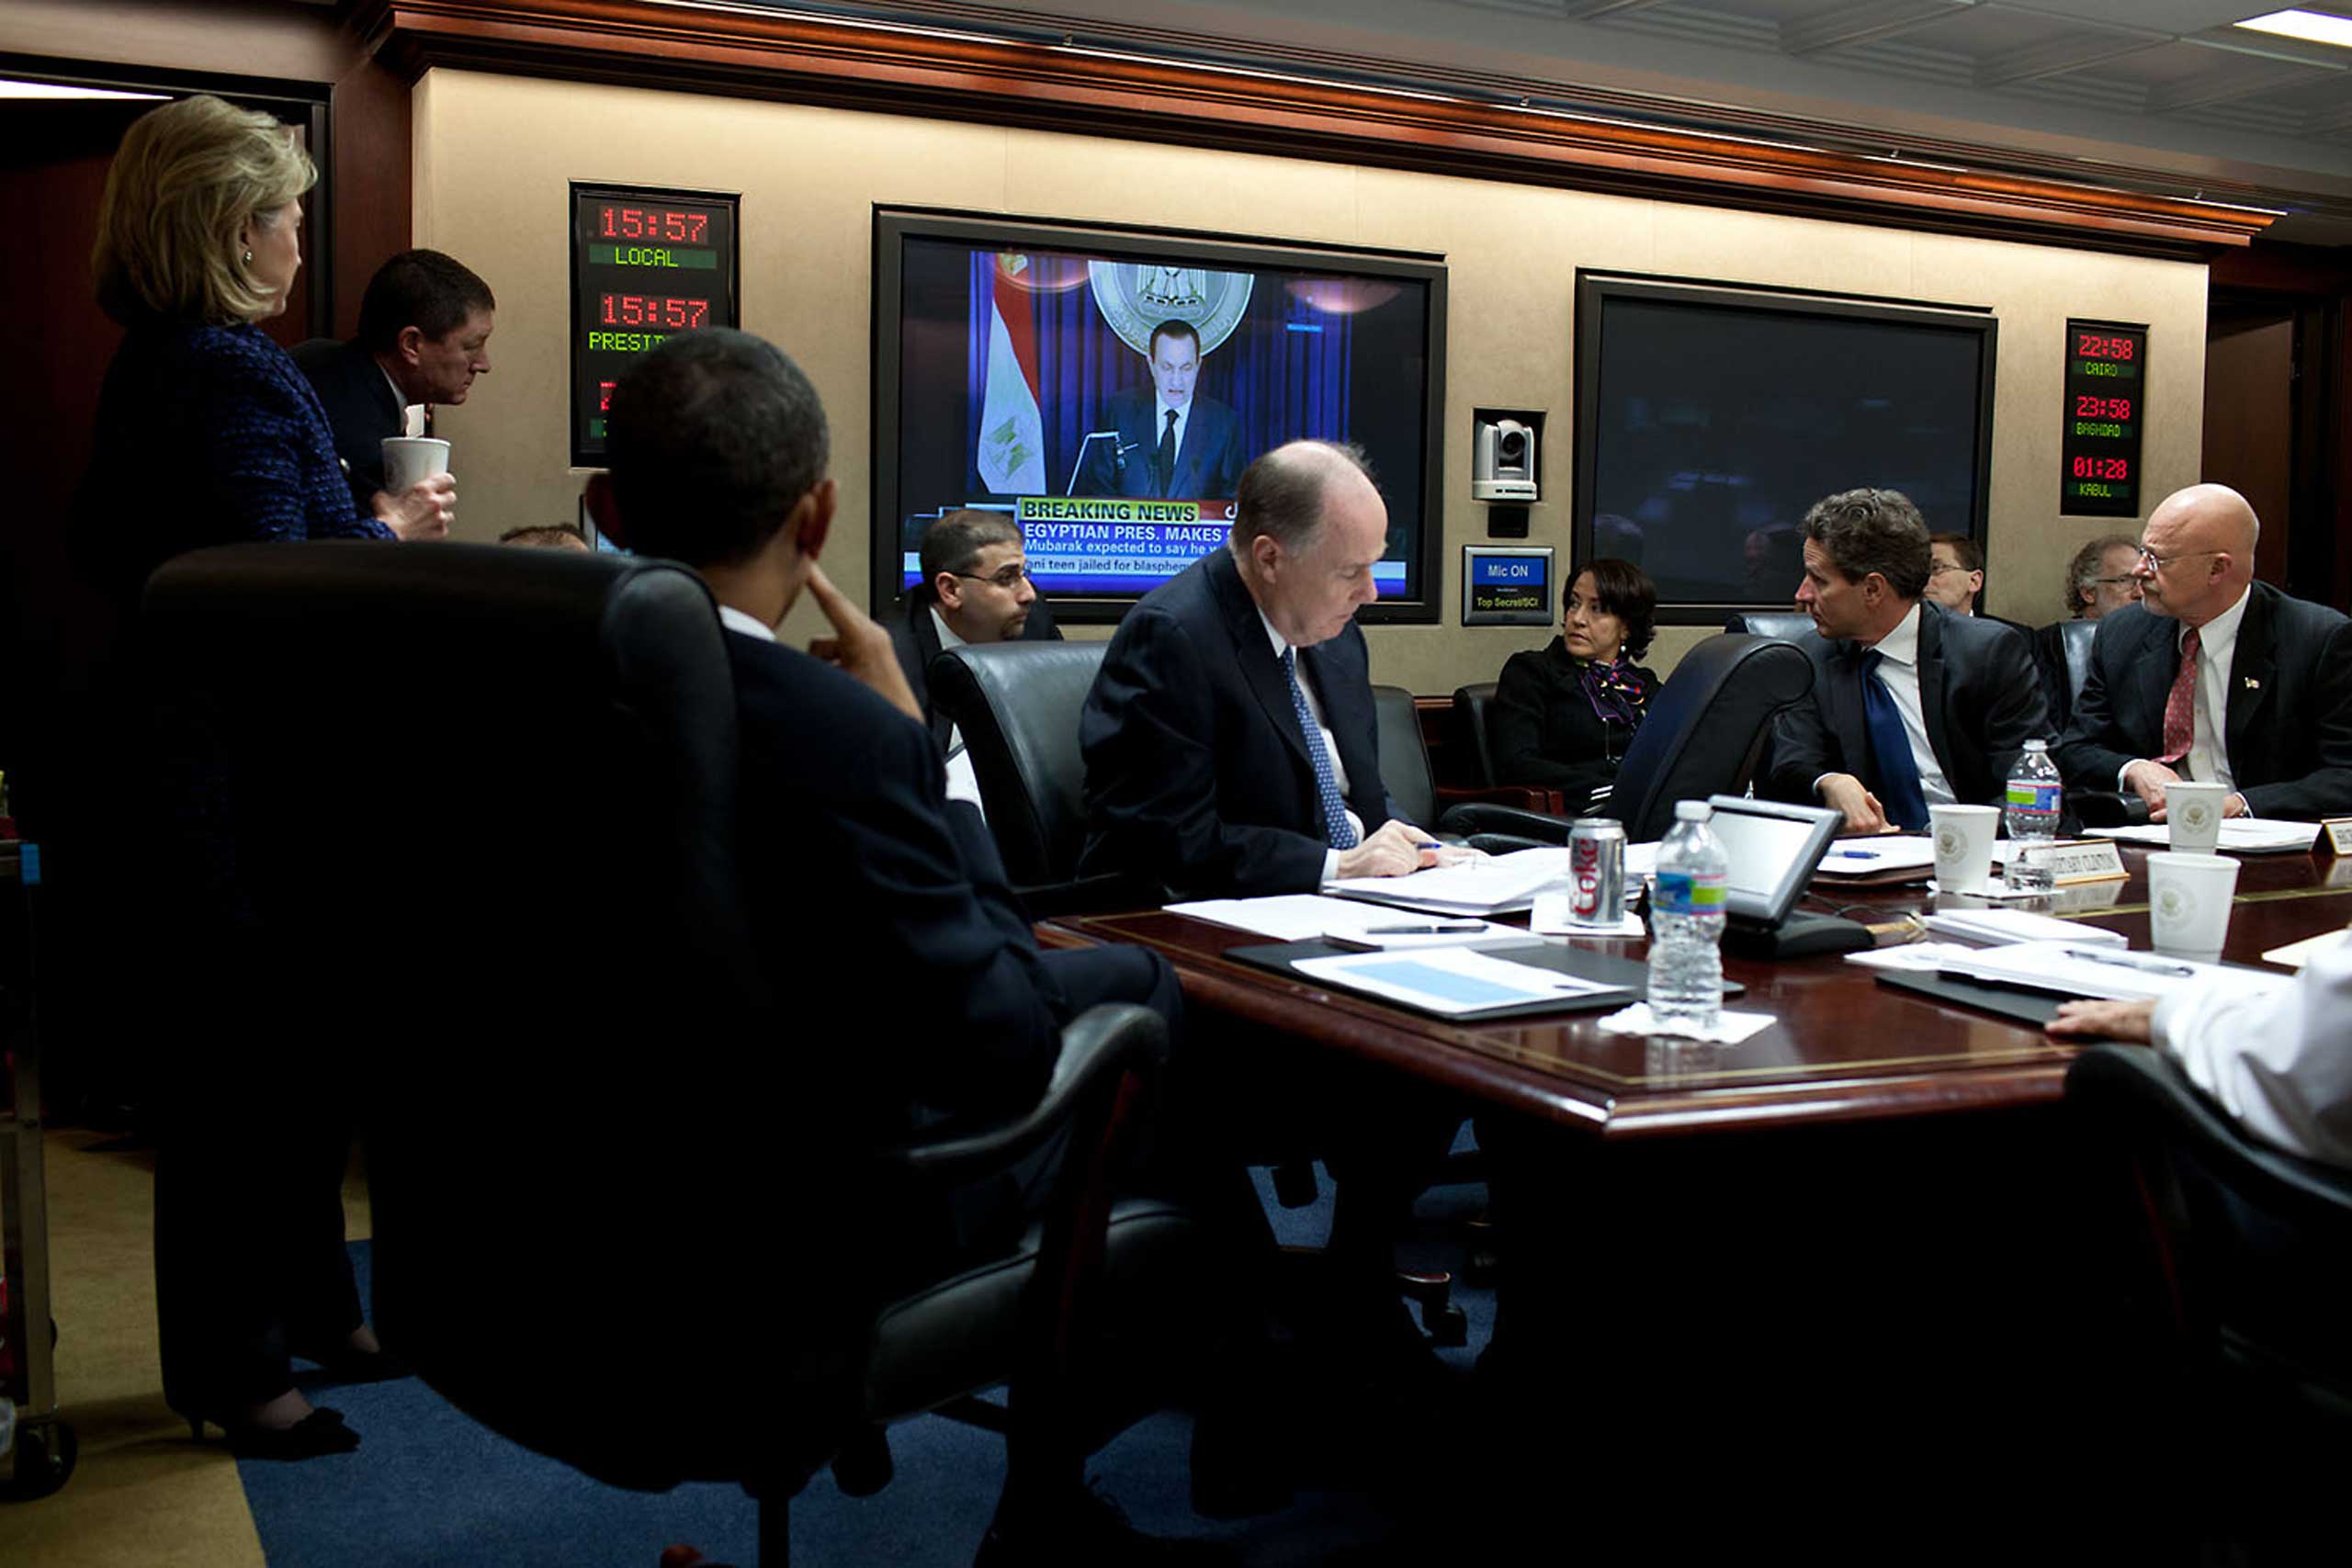 The President and his national security team were gathered in the Situation Room to discuss the developing events in Egypt on Feb. 1, 2011. An aide rushed in to say that Egyptian President Hosni Mubarak was making a live televised statement, so the feed was patched in so everyone could watch Mubarak. In the midst of days of protests calling for his ouster, Mubarak in this statement said he would step down at the end of his term.